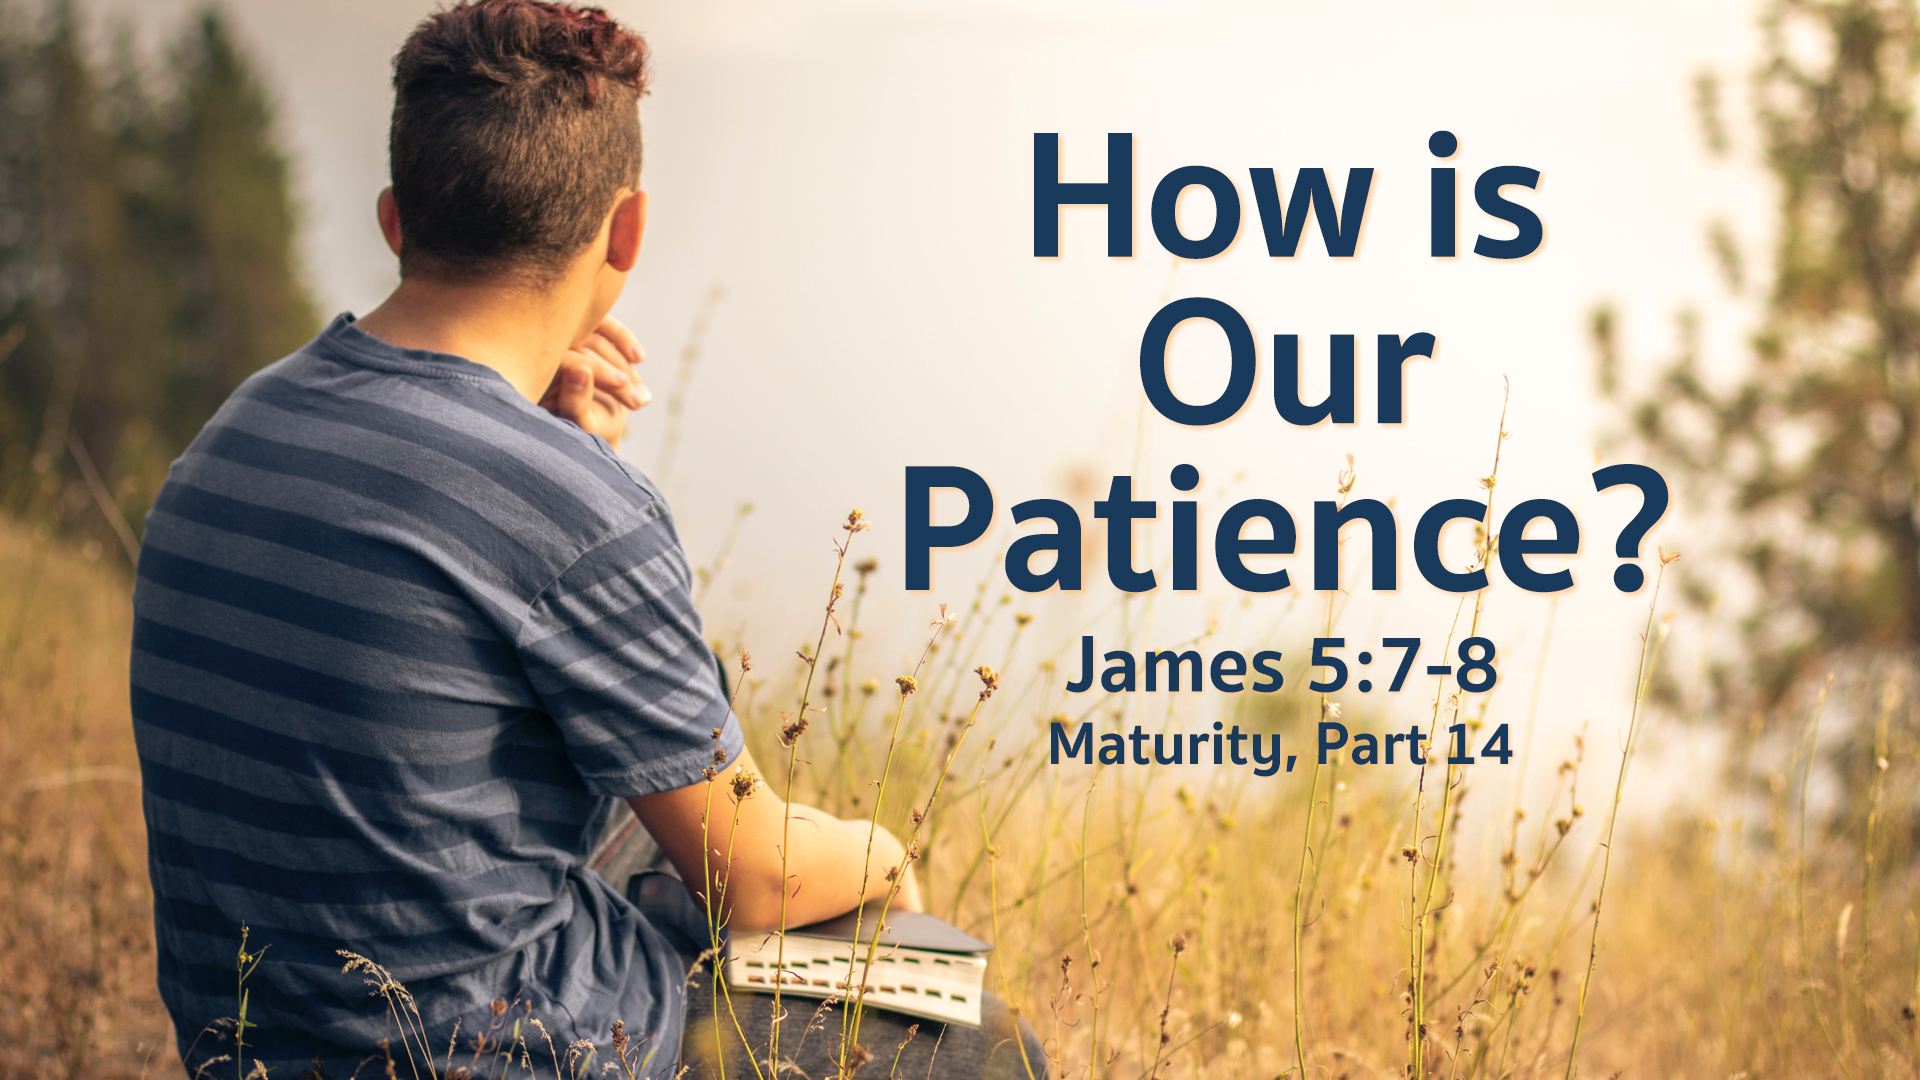 How is Our Patience? Part 2